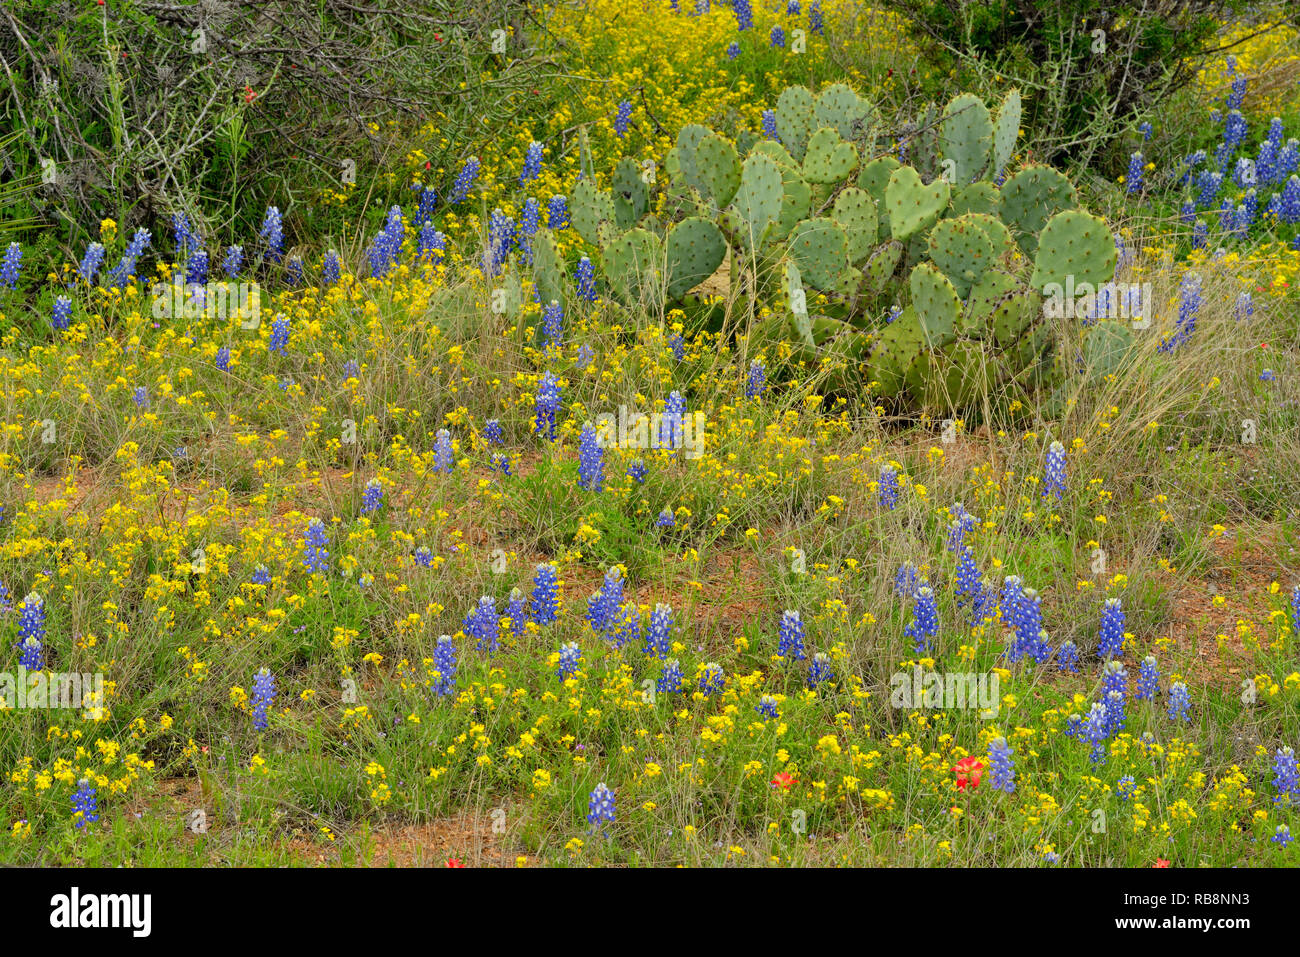 Texas bluebonnets blooming in a  rocky landscape with cactus and yucca, Willow City, Gillespie County, Texas, USA Stock Photo